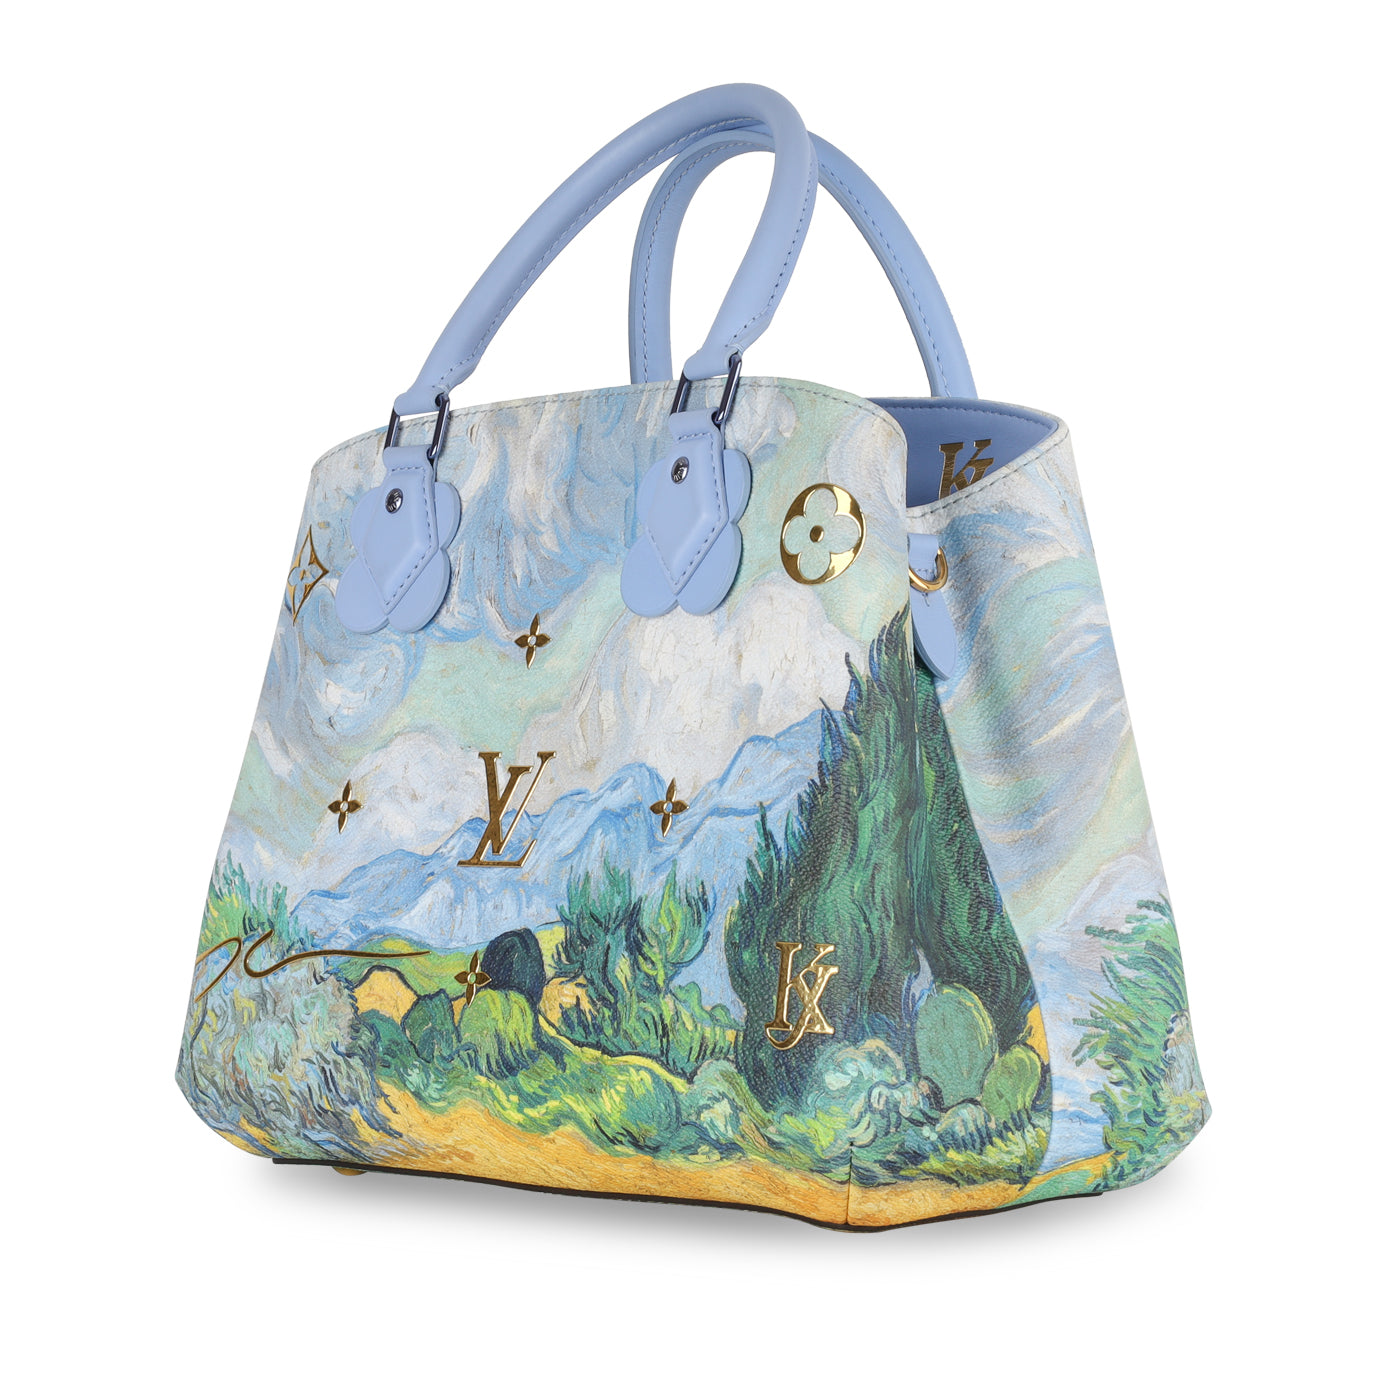 LV 2017 Limited Edition Masters Jeff Koons Rubens Neverfull MM Tote Bag For  Sale at 1stDibs